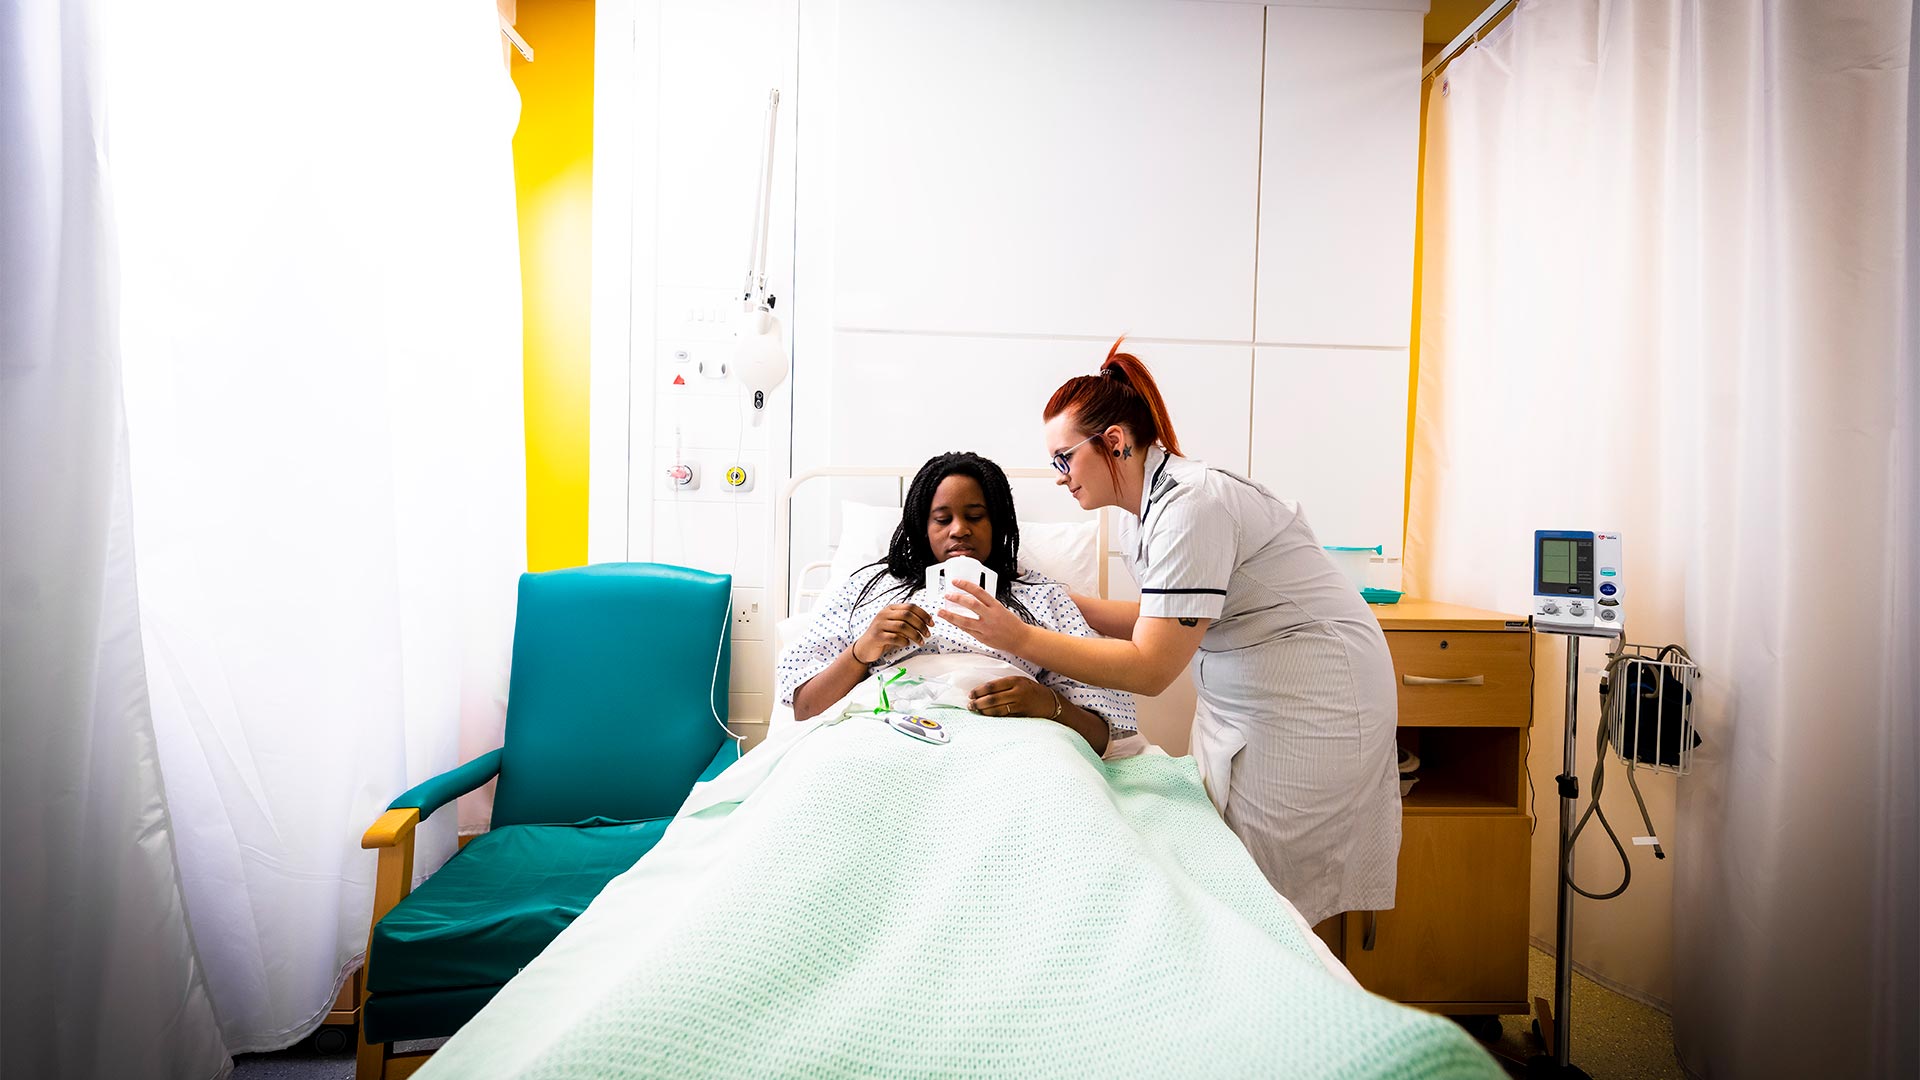 student in a mock ward role playing with a patient